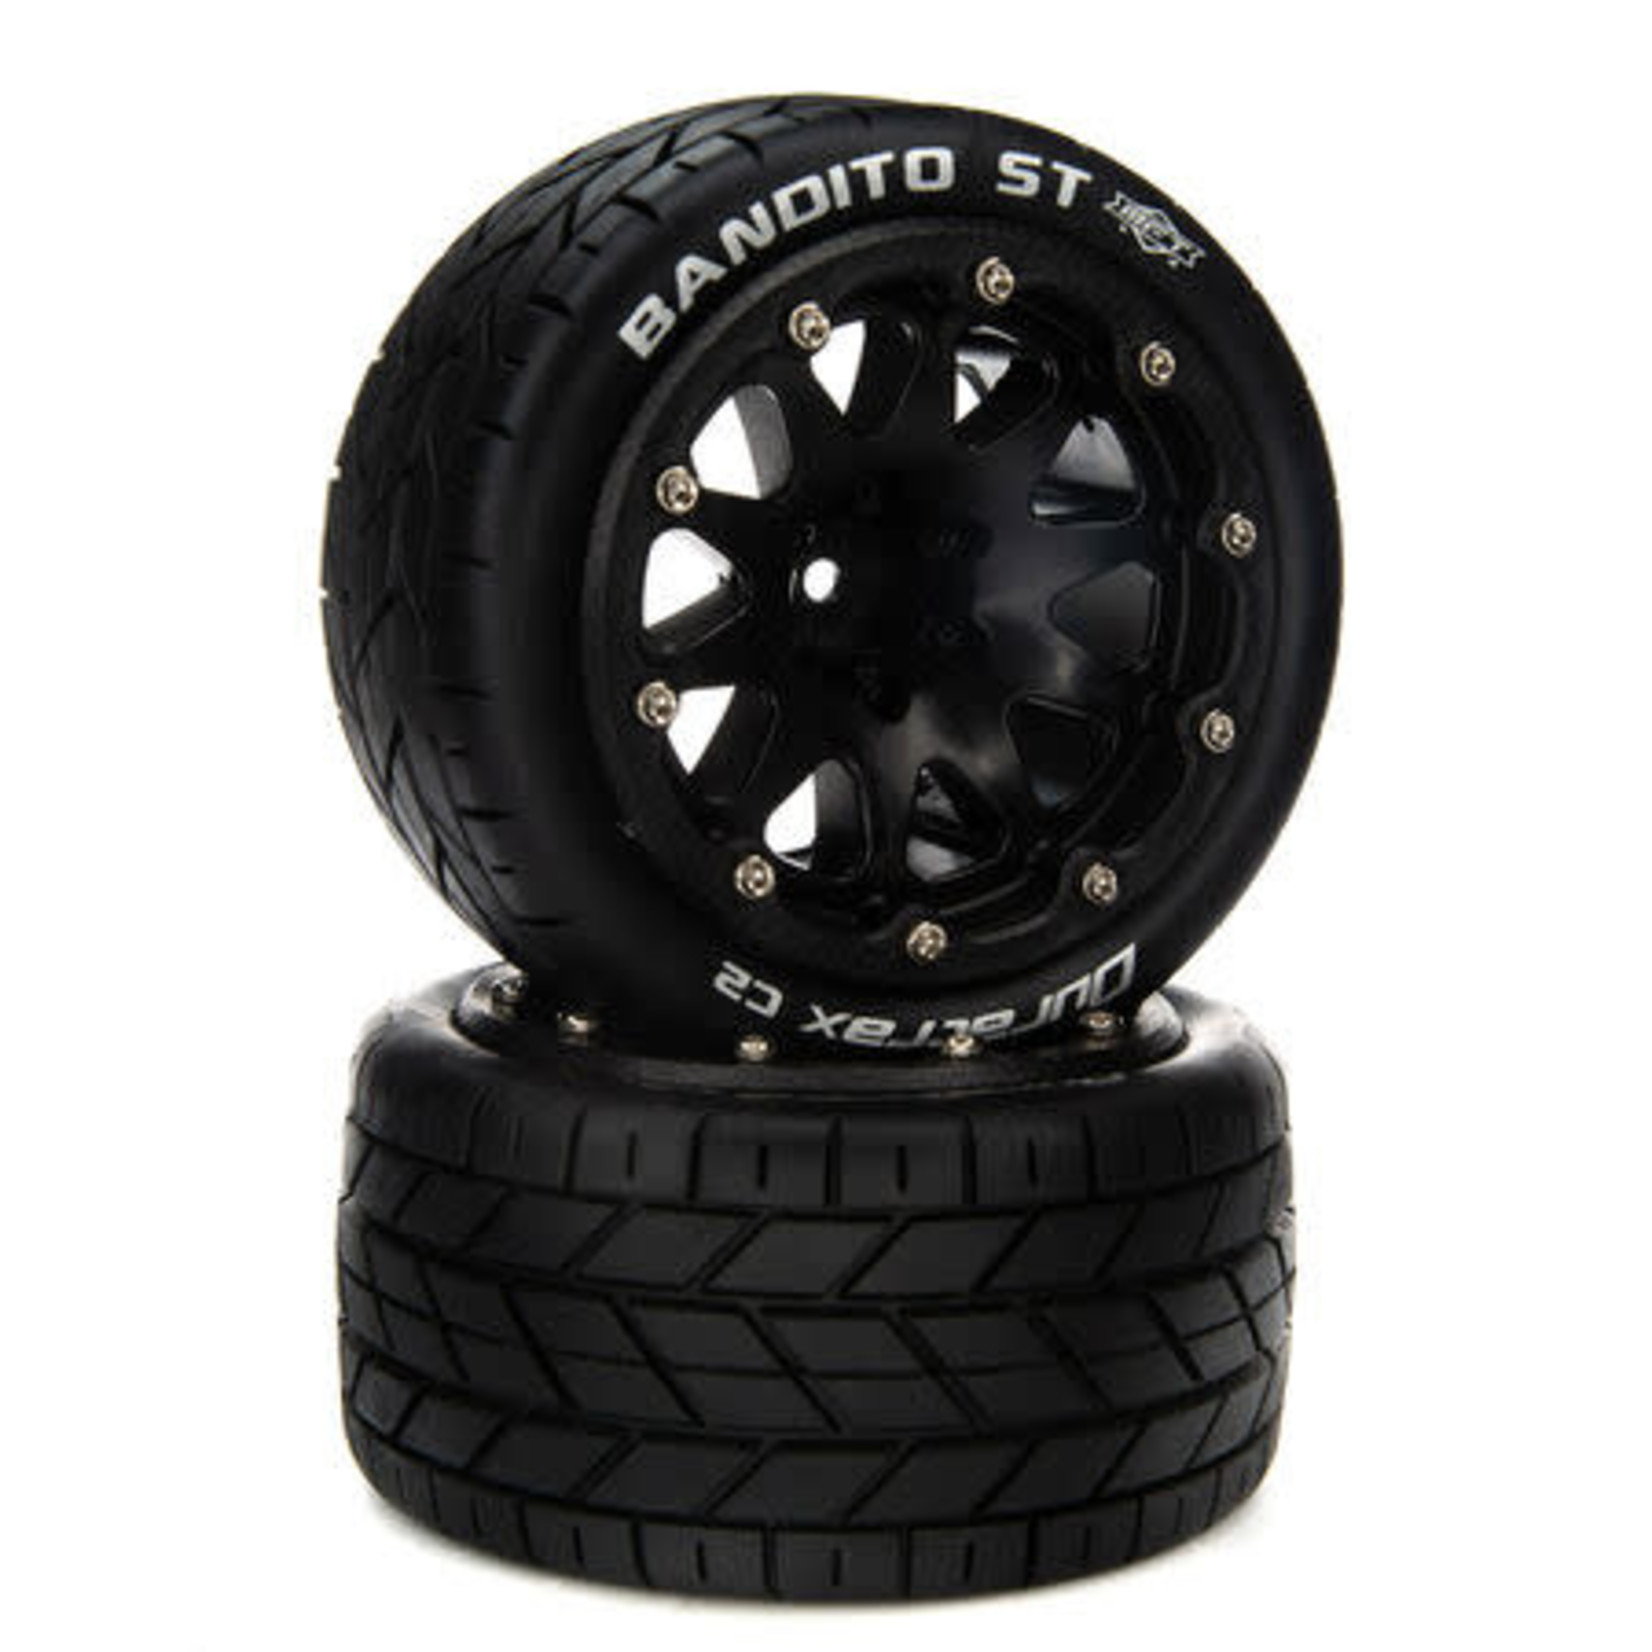 Duratrax 2.8 Bandito ST Belted Mounted F/R 14mm Black (2)